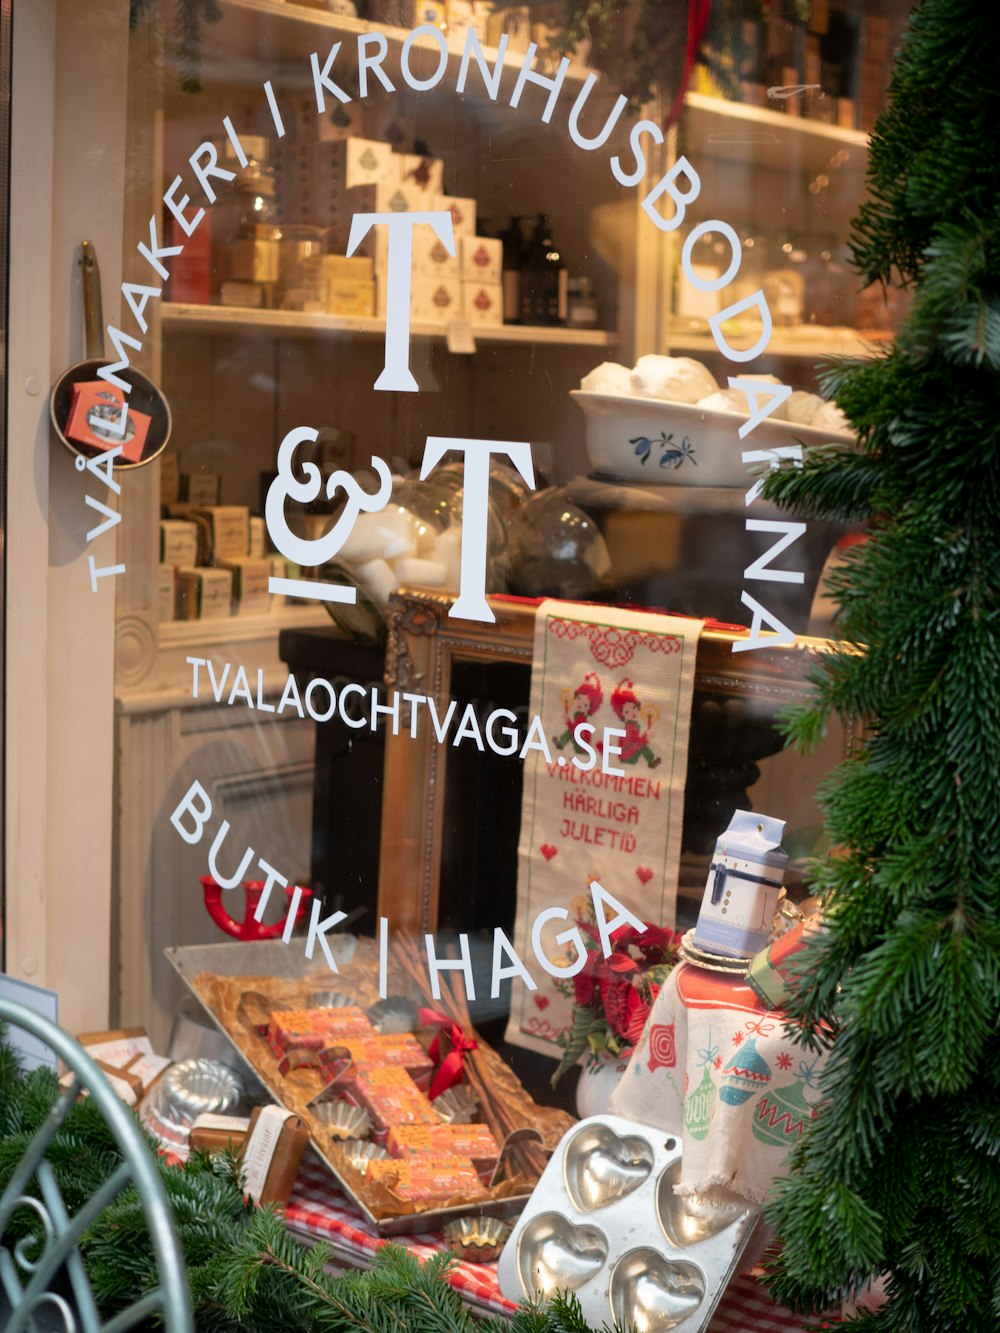 a store window with christmas decorations and gifts in it